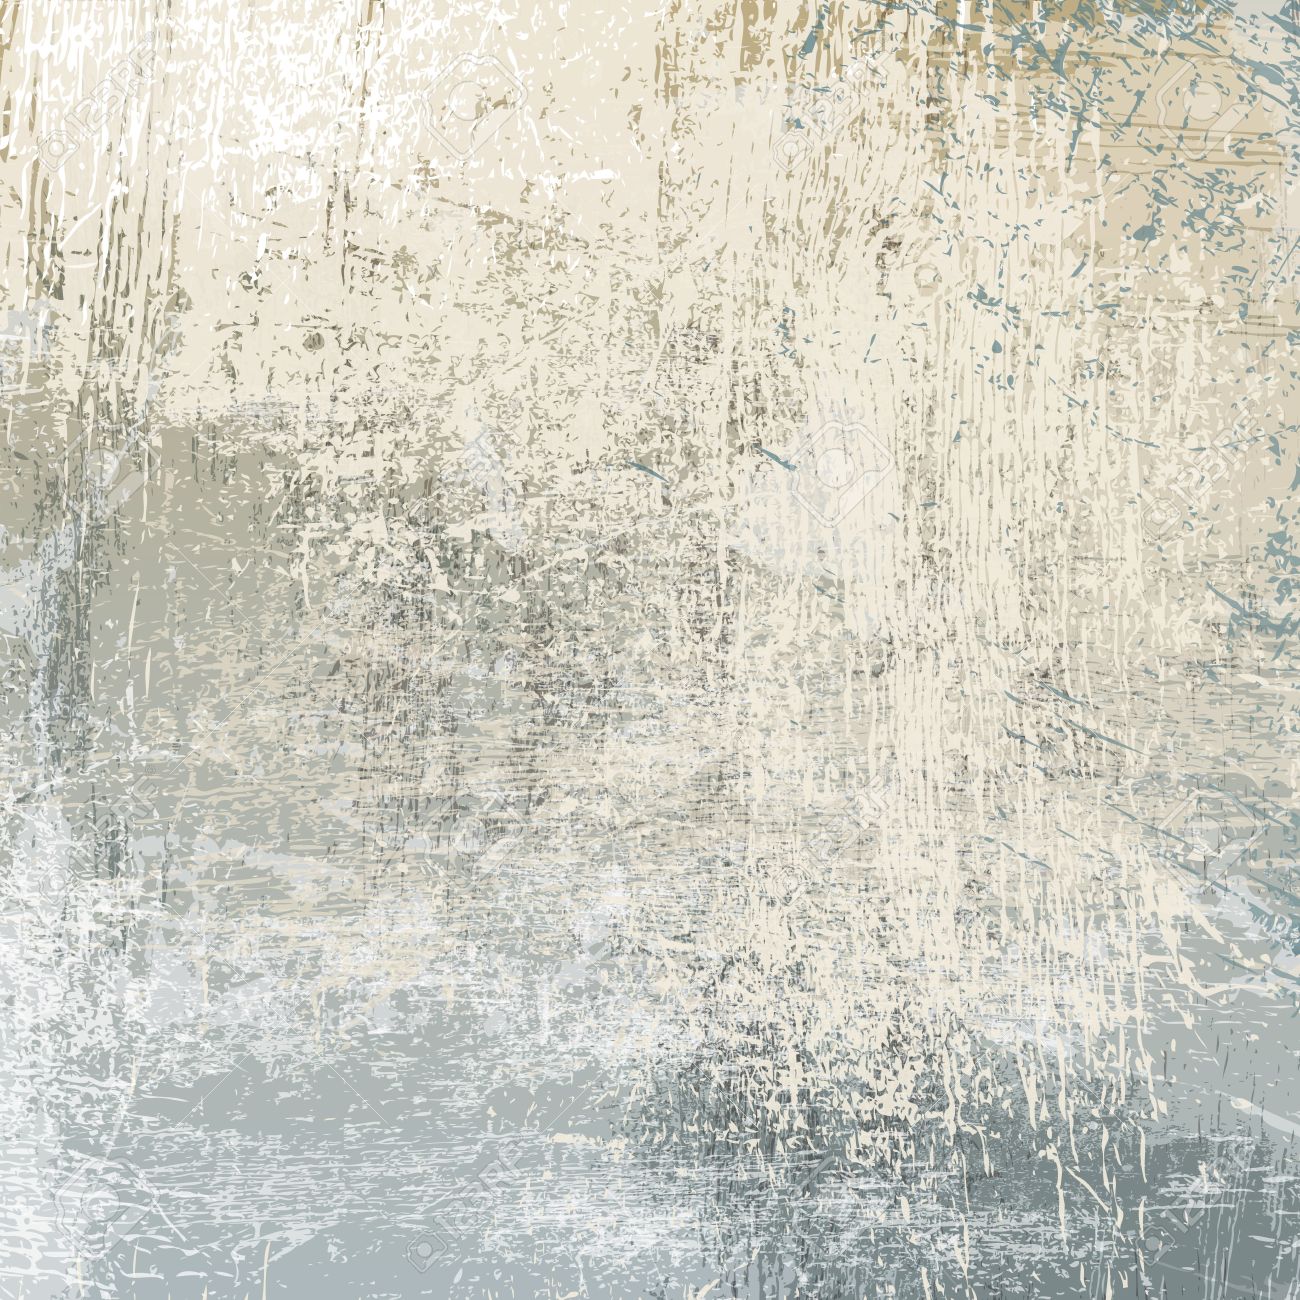 Designed Grunge Paper Texture Background Distressed Cracked